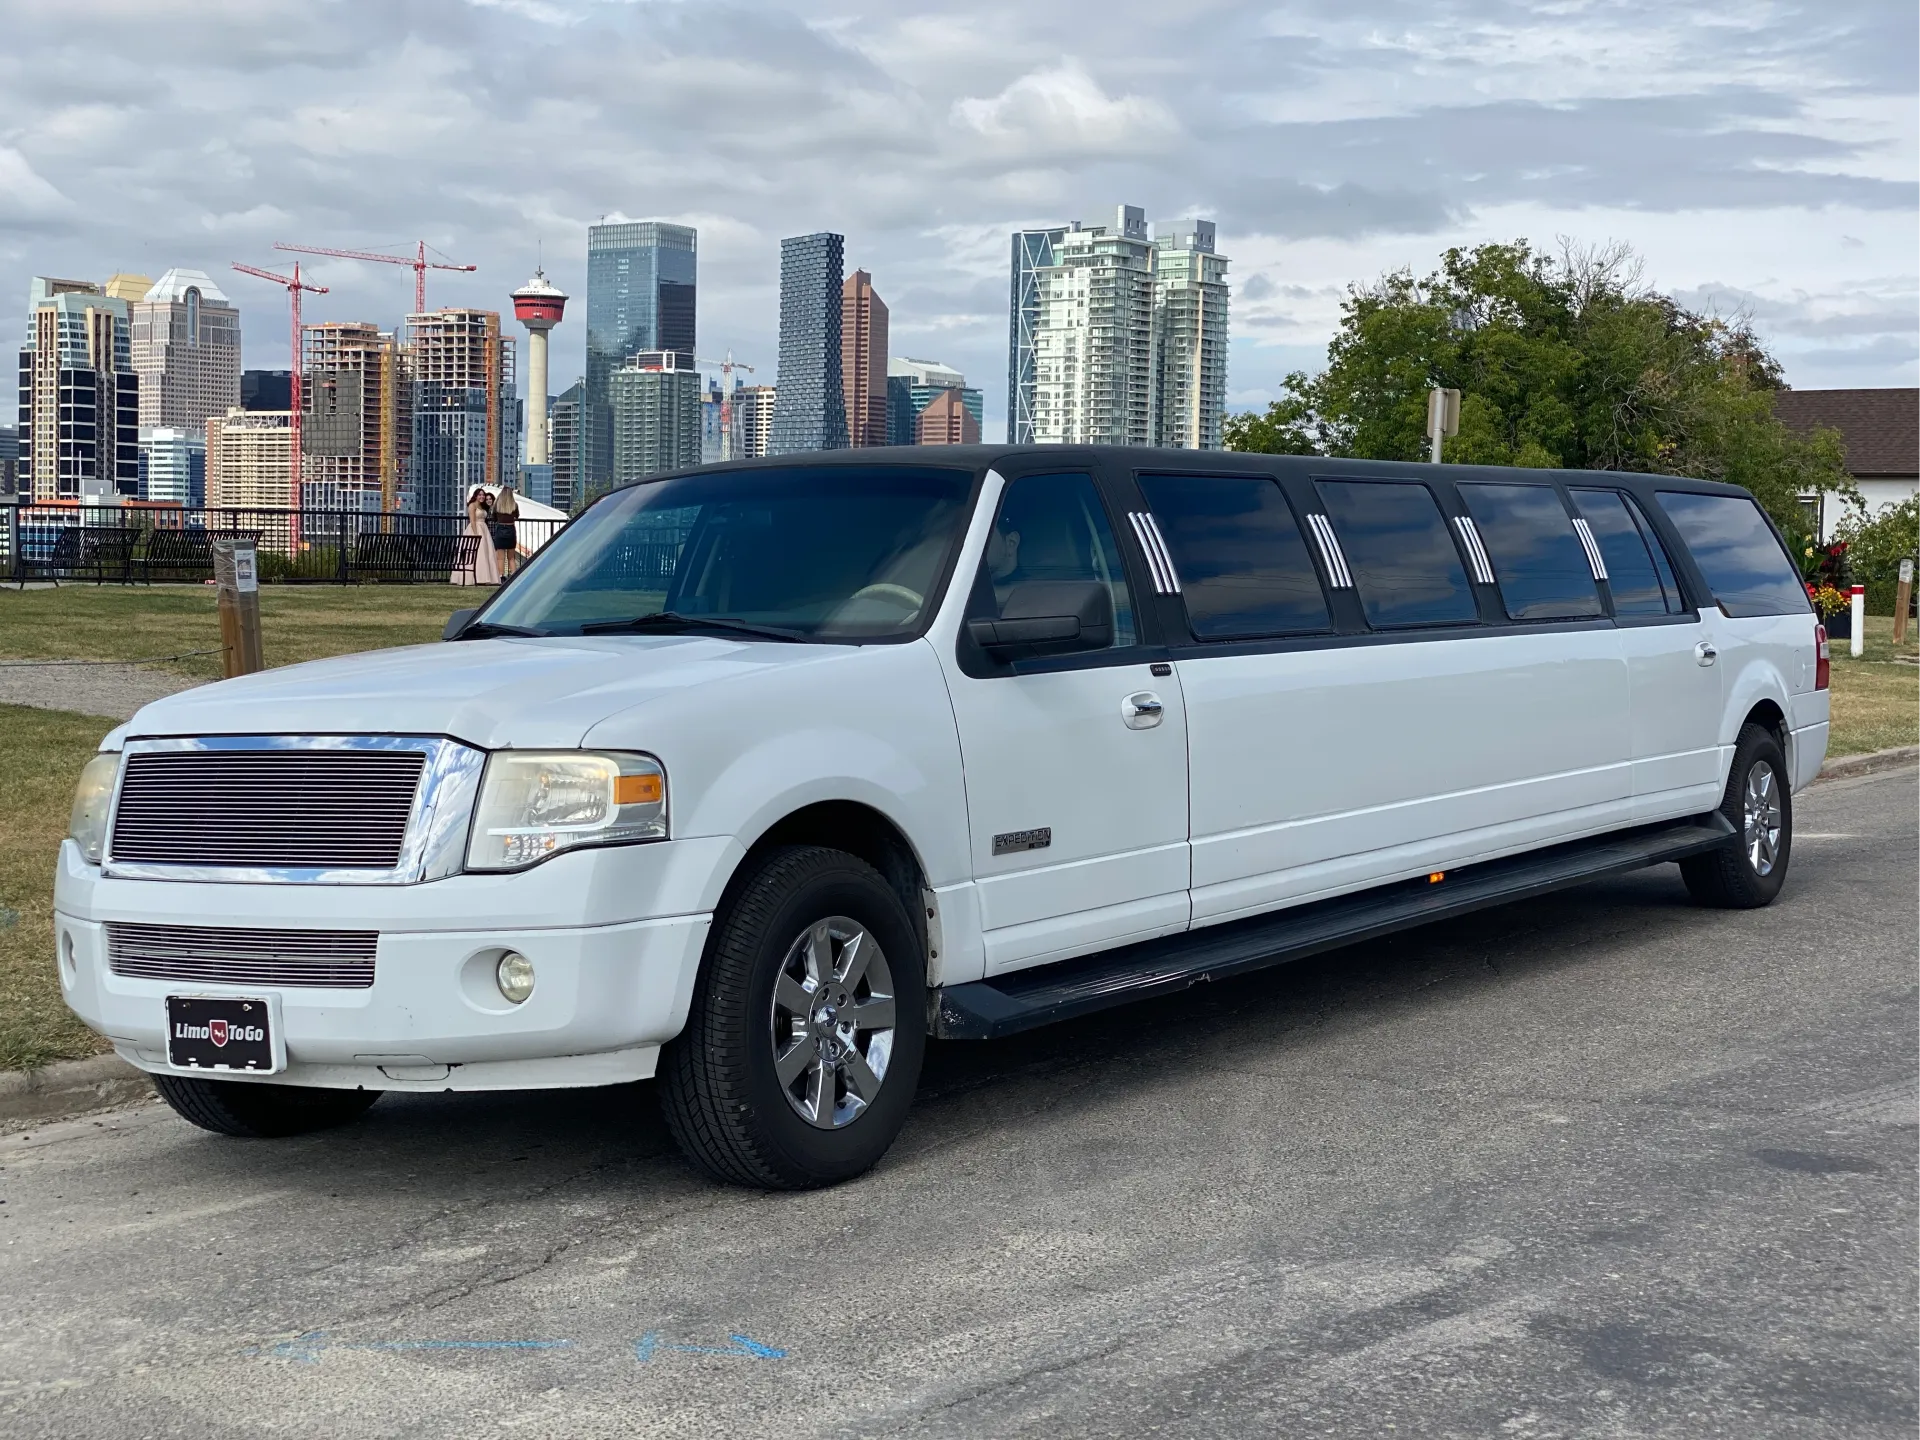 Reasons to Hire a Limo